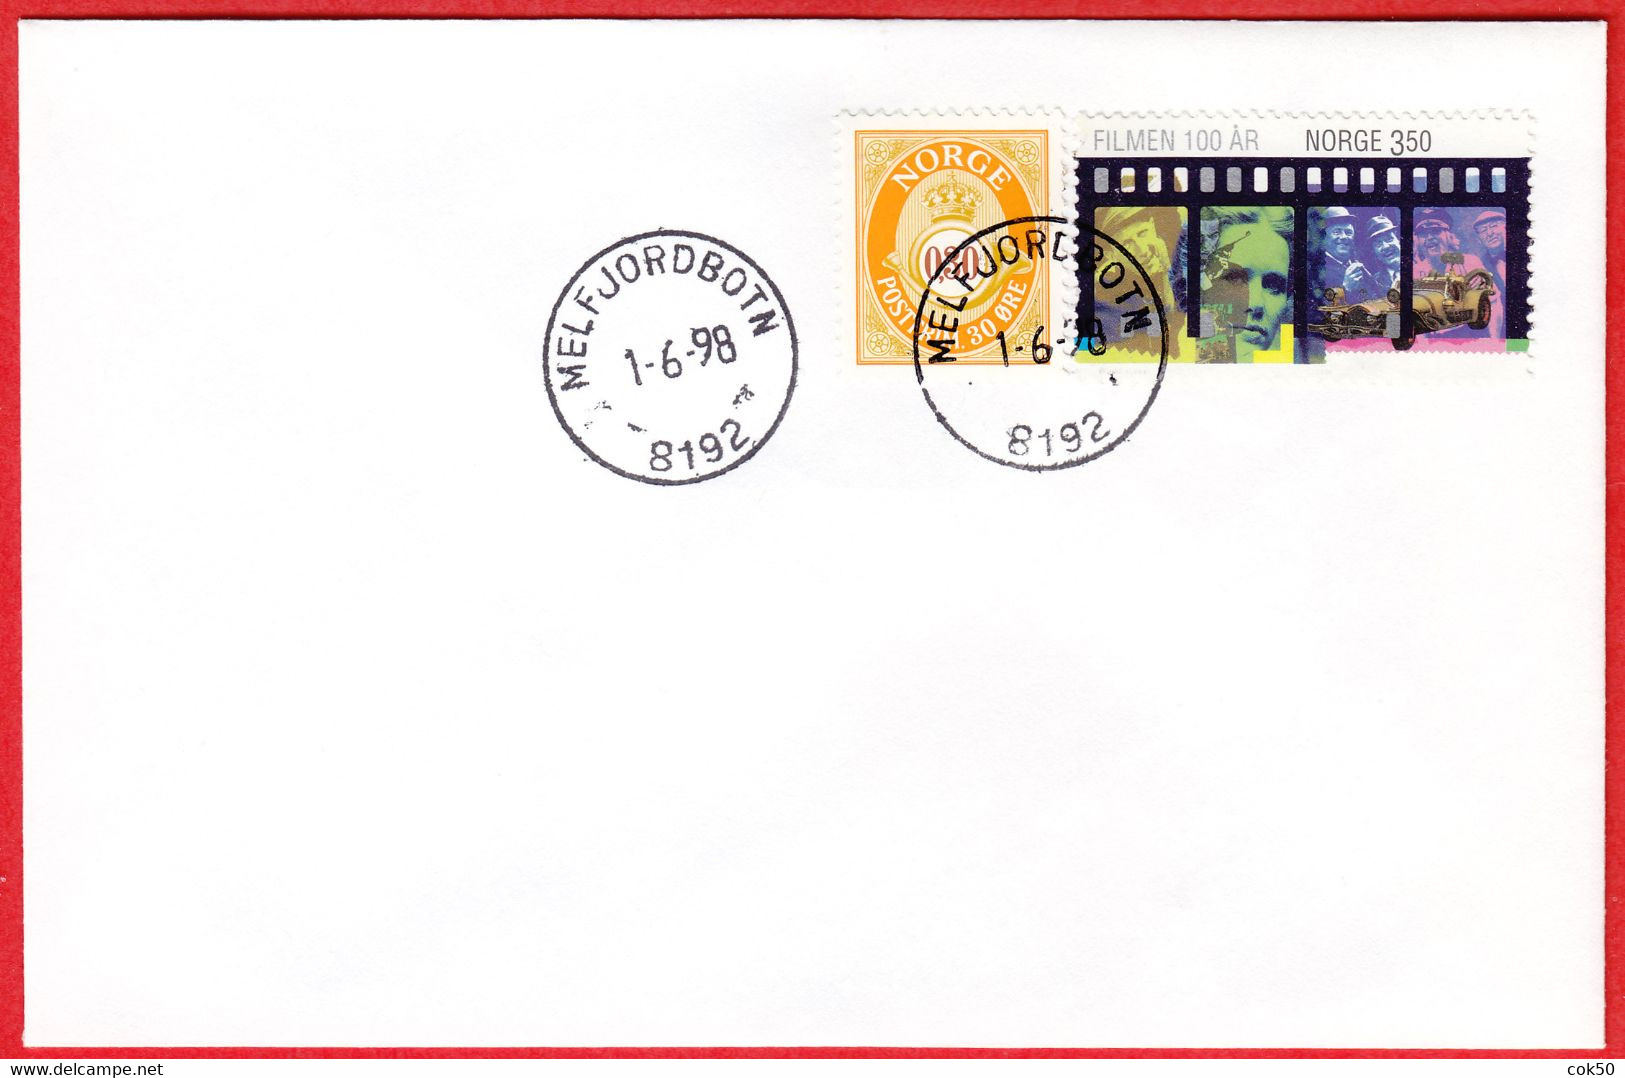 NORWAY -  8192 MELFJORDBOTN (Nordland County) - Last Day/postoffice Closed On 1998.06.01 - Local Post Stamps